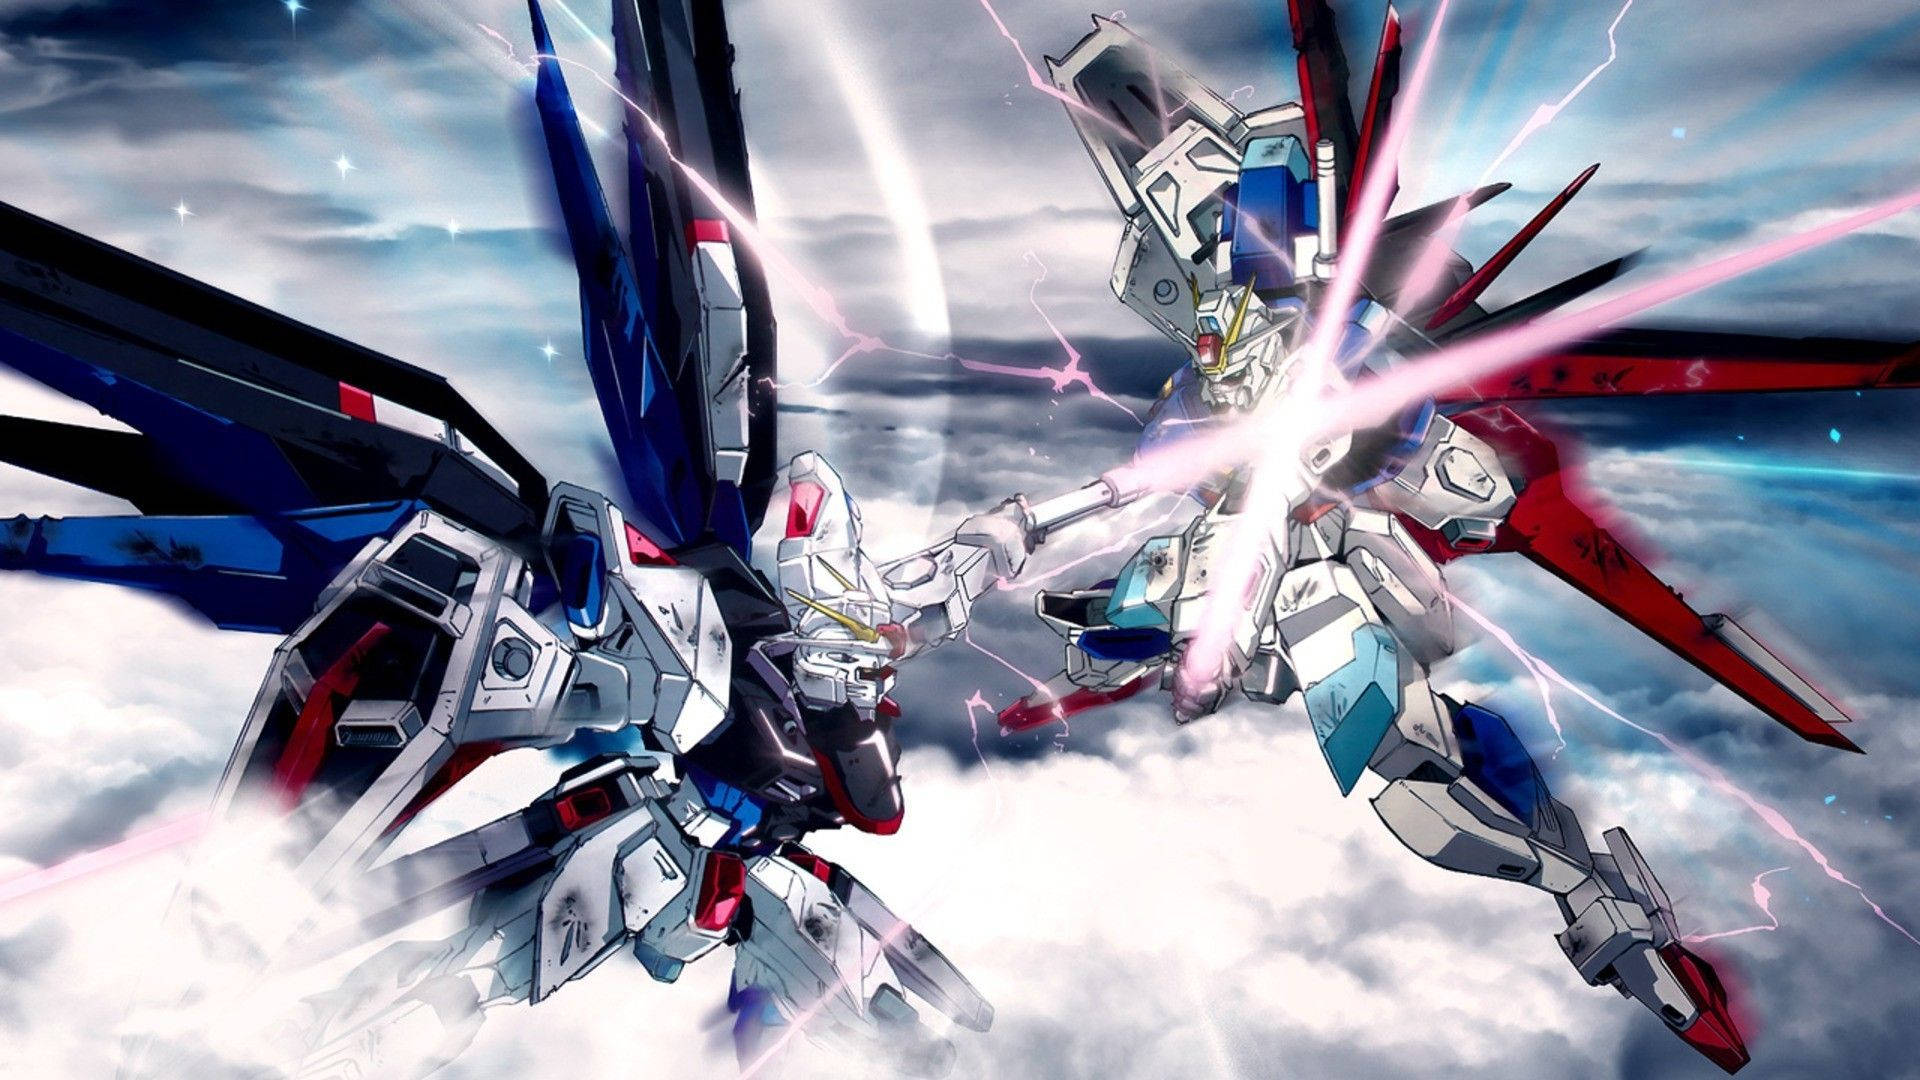 Get ready for a devastating Gundam battle with this powerful mech! Wallpaper